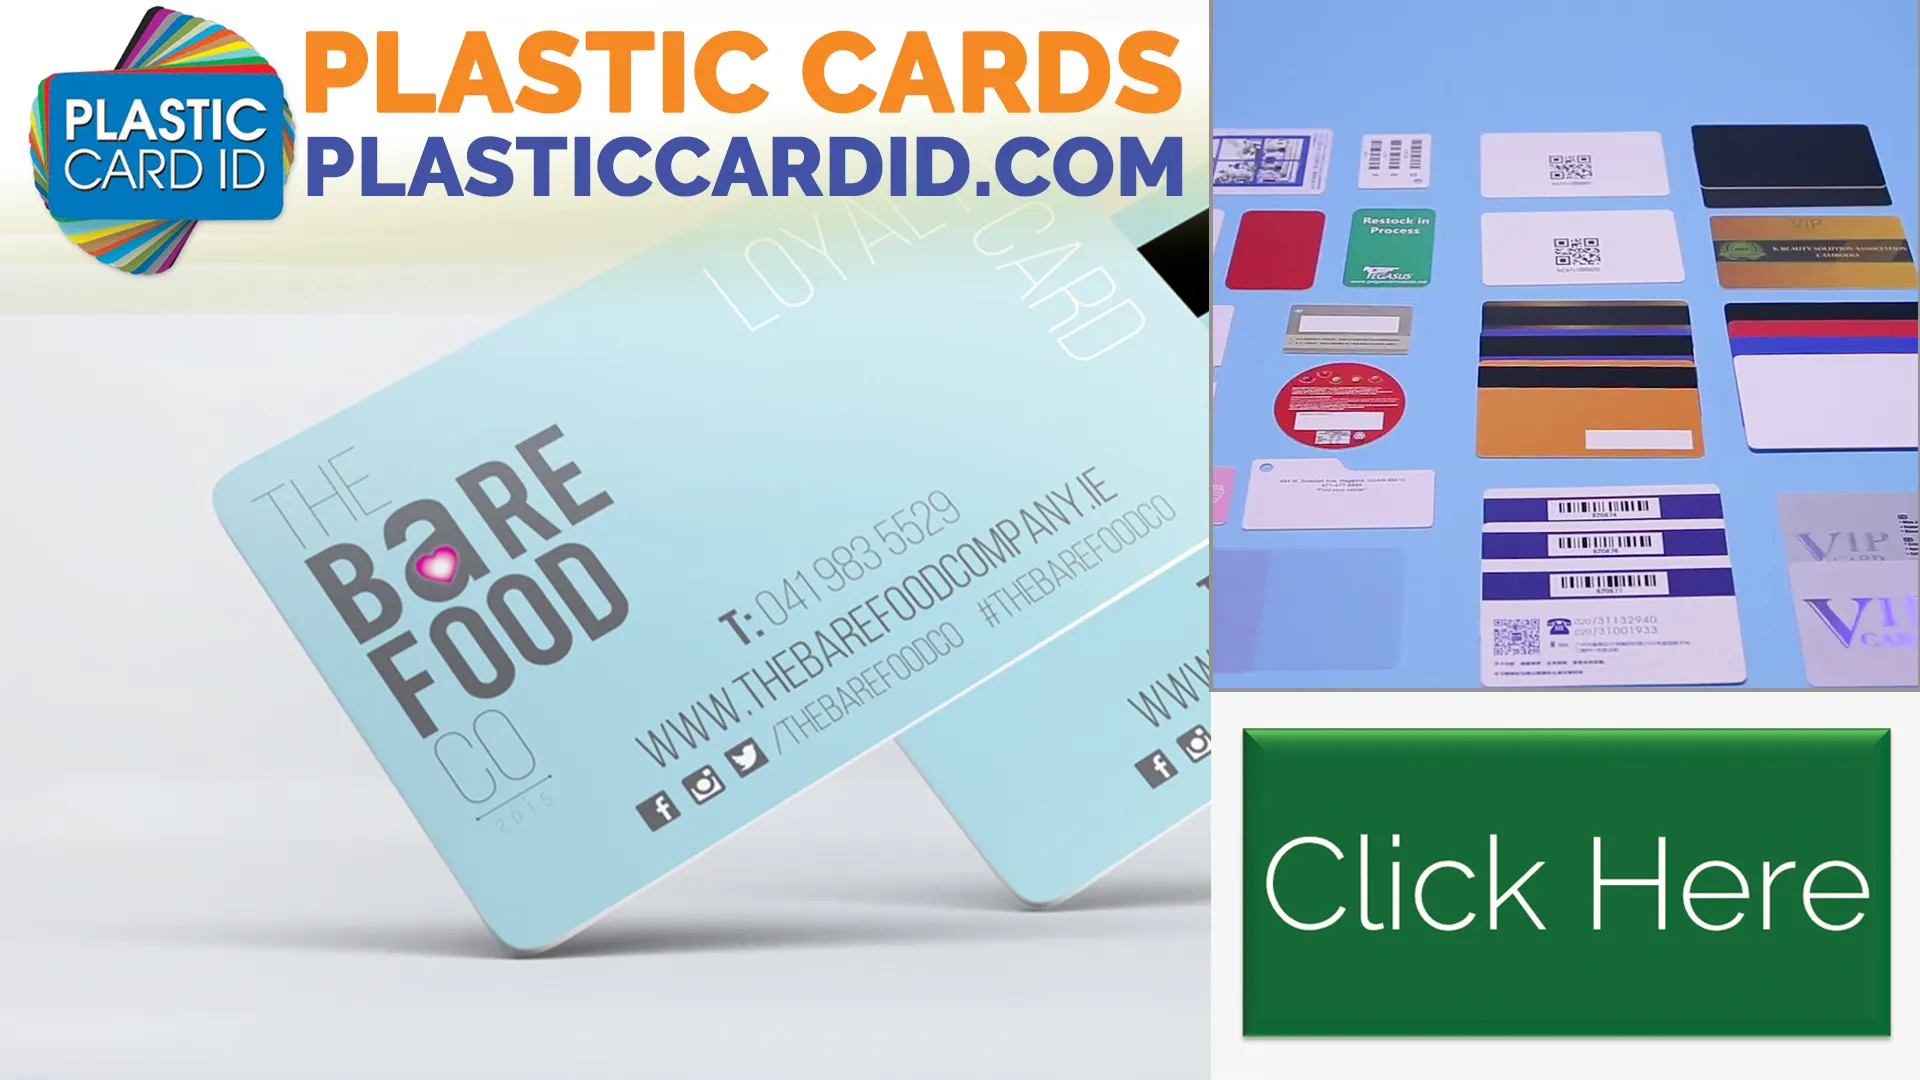 Cards That Speak Volumes About Your Business